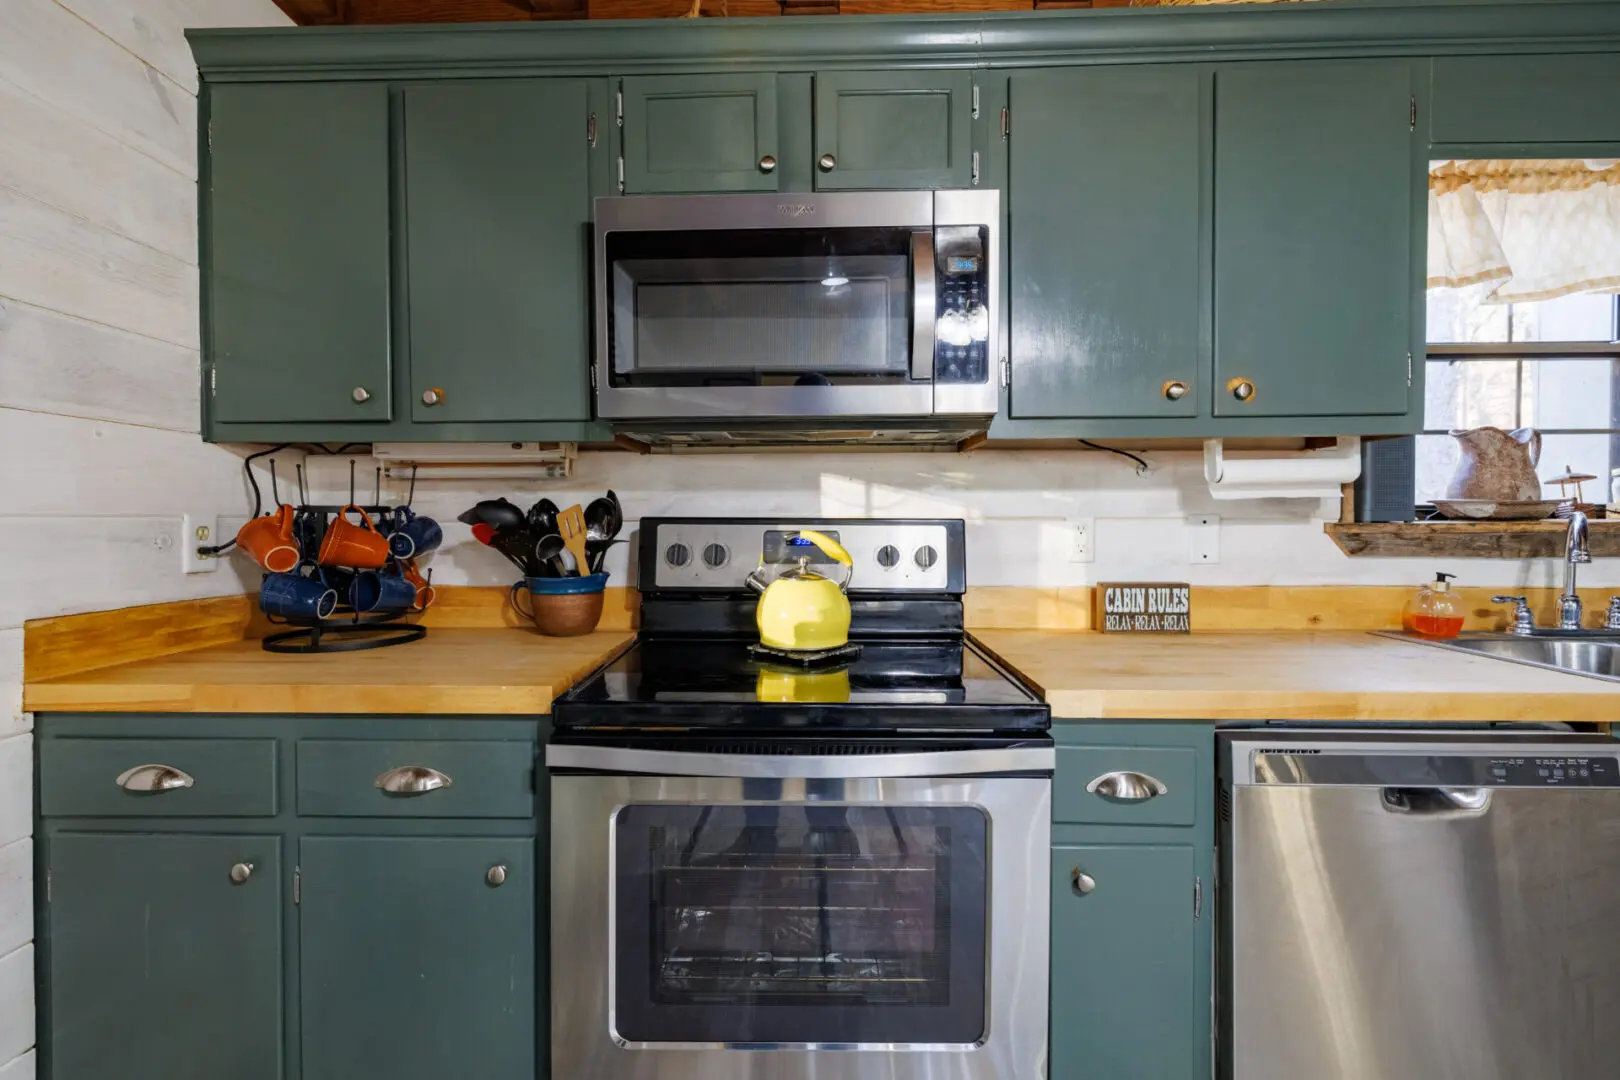 A vacation kitchen with green cabinets and a microwave.